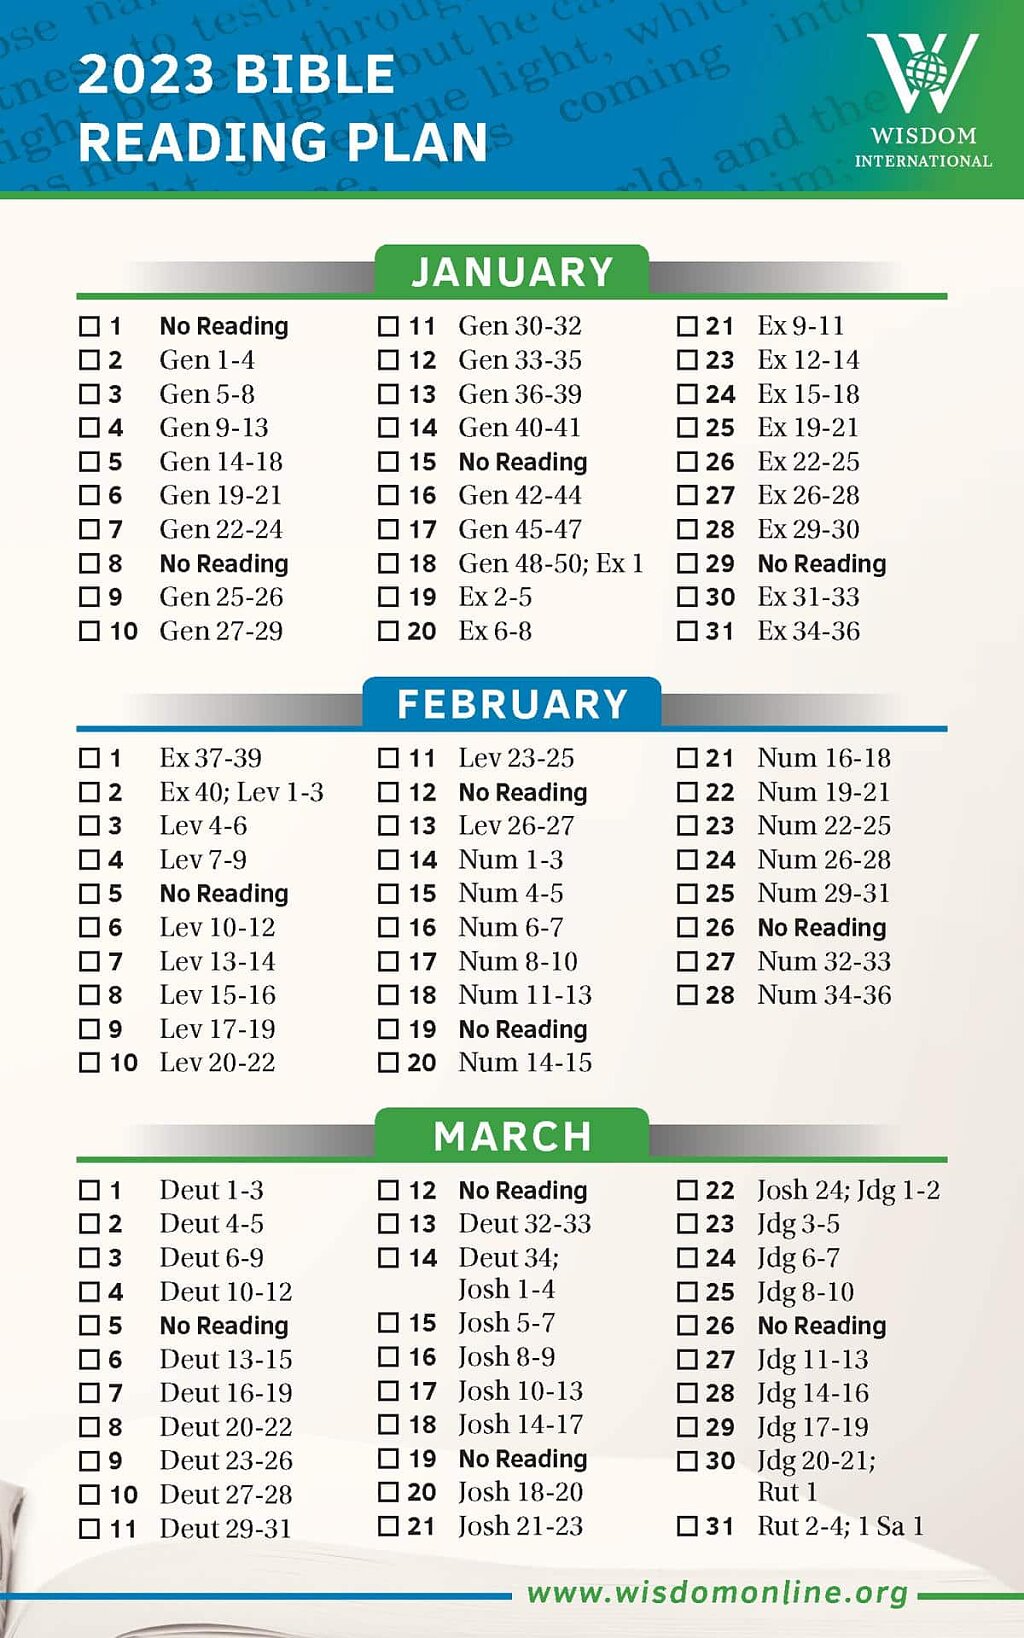 2023 Bible Reading Plan for January through March